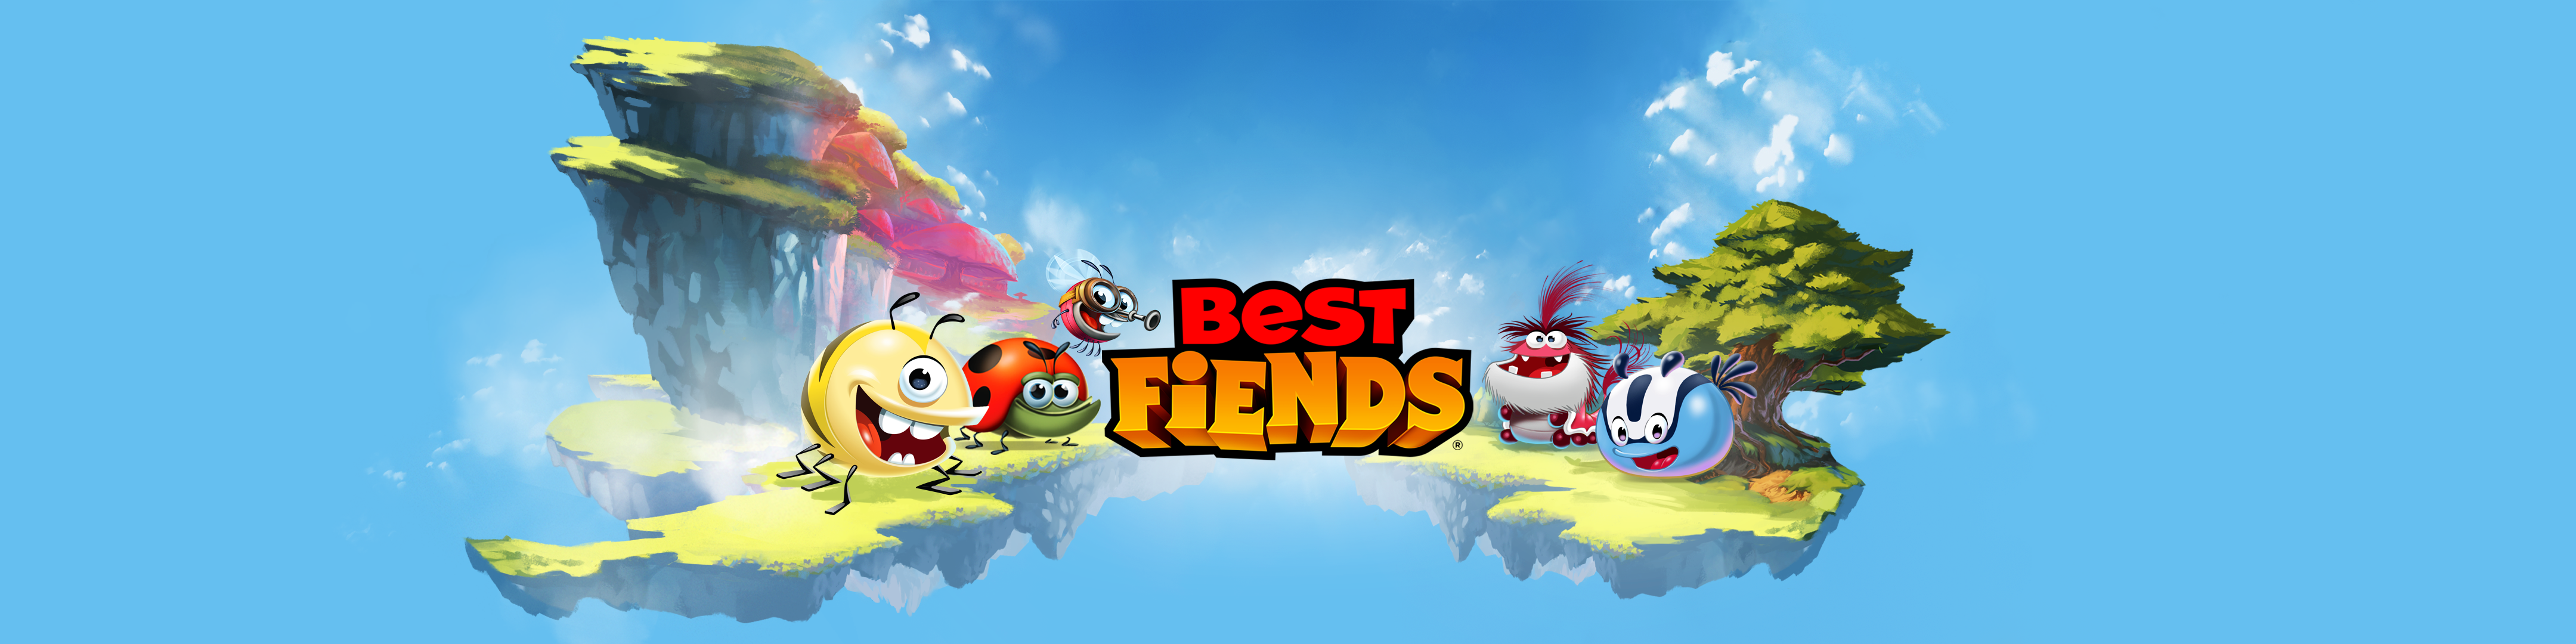 25 Best Pictures Best Fiends App Icon / Best Fiends On Twitter Cartoon Free Transparent Png Clipart Images Download